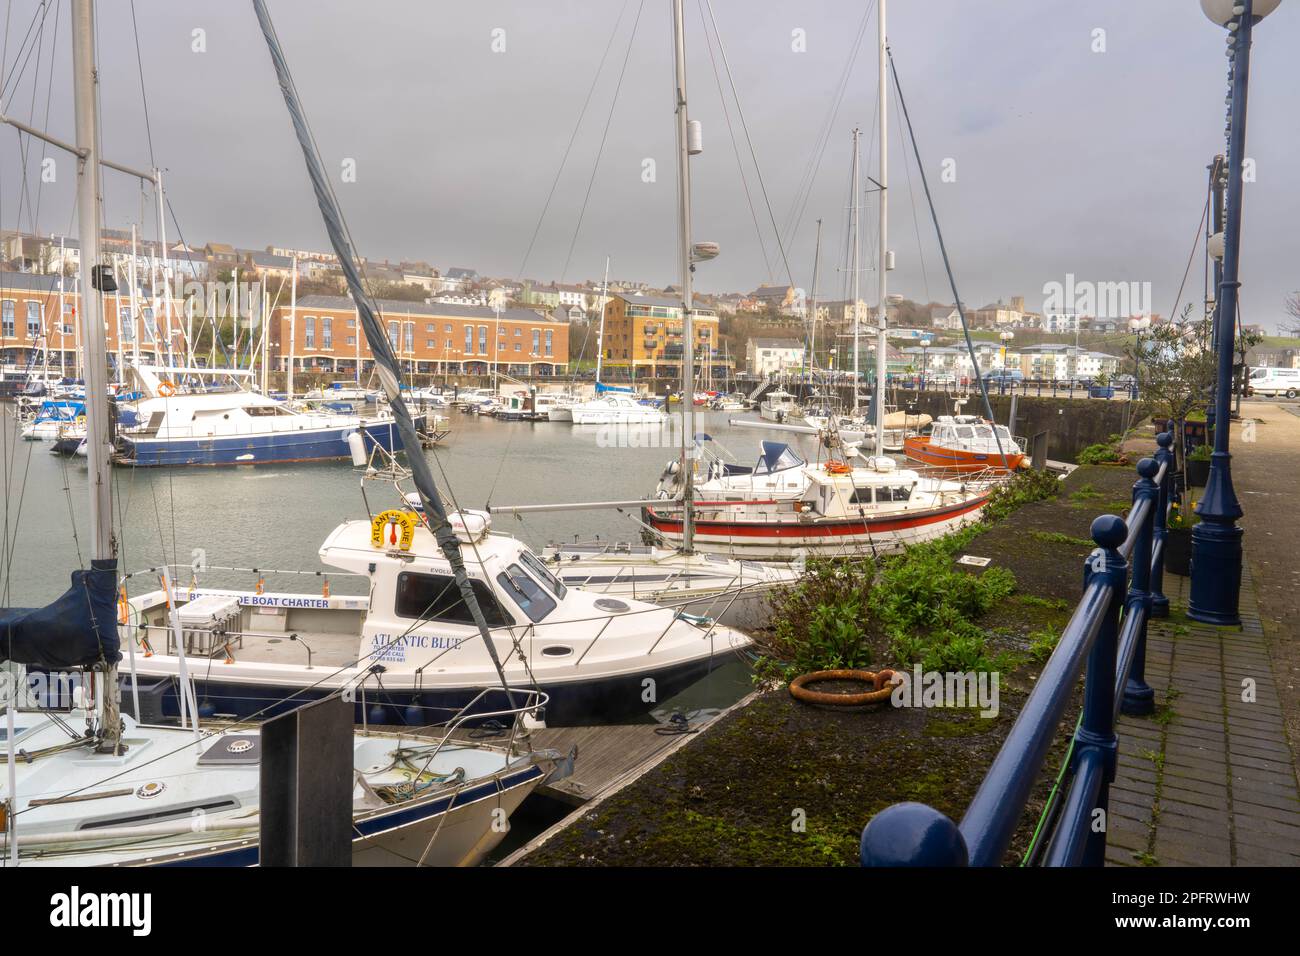 Yachts and boats moored in the harbour marina at Milford Haven Pembrokeshire Wales UK Stock Photo